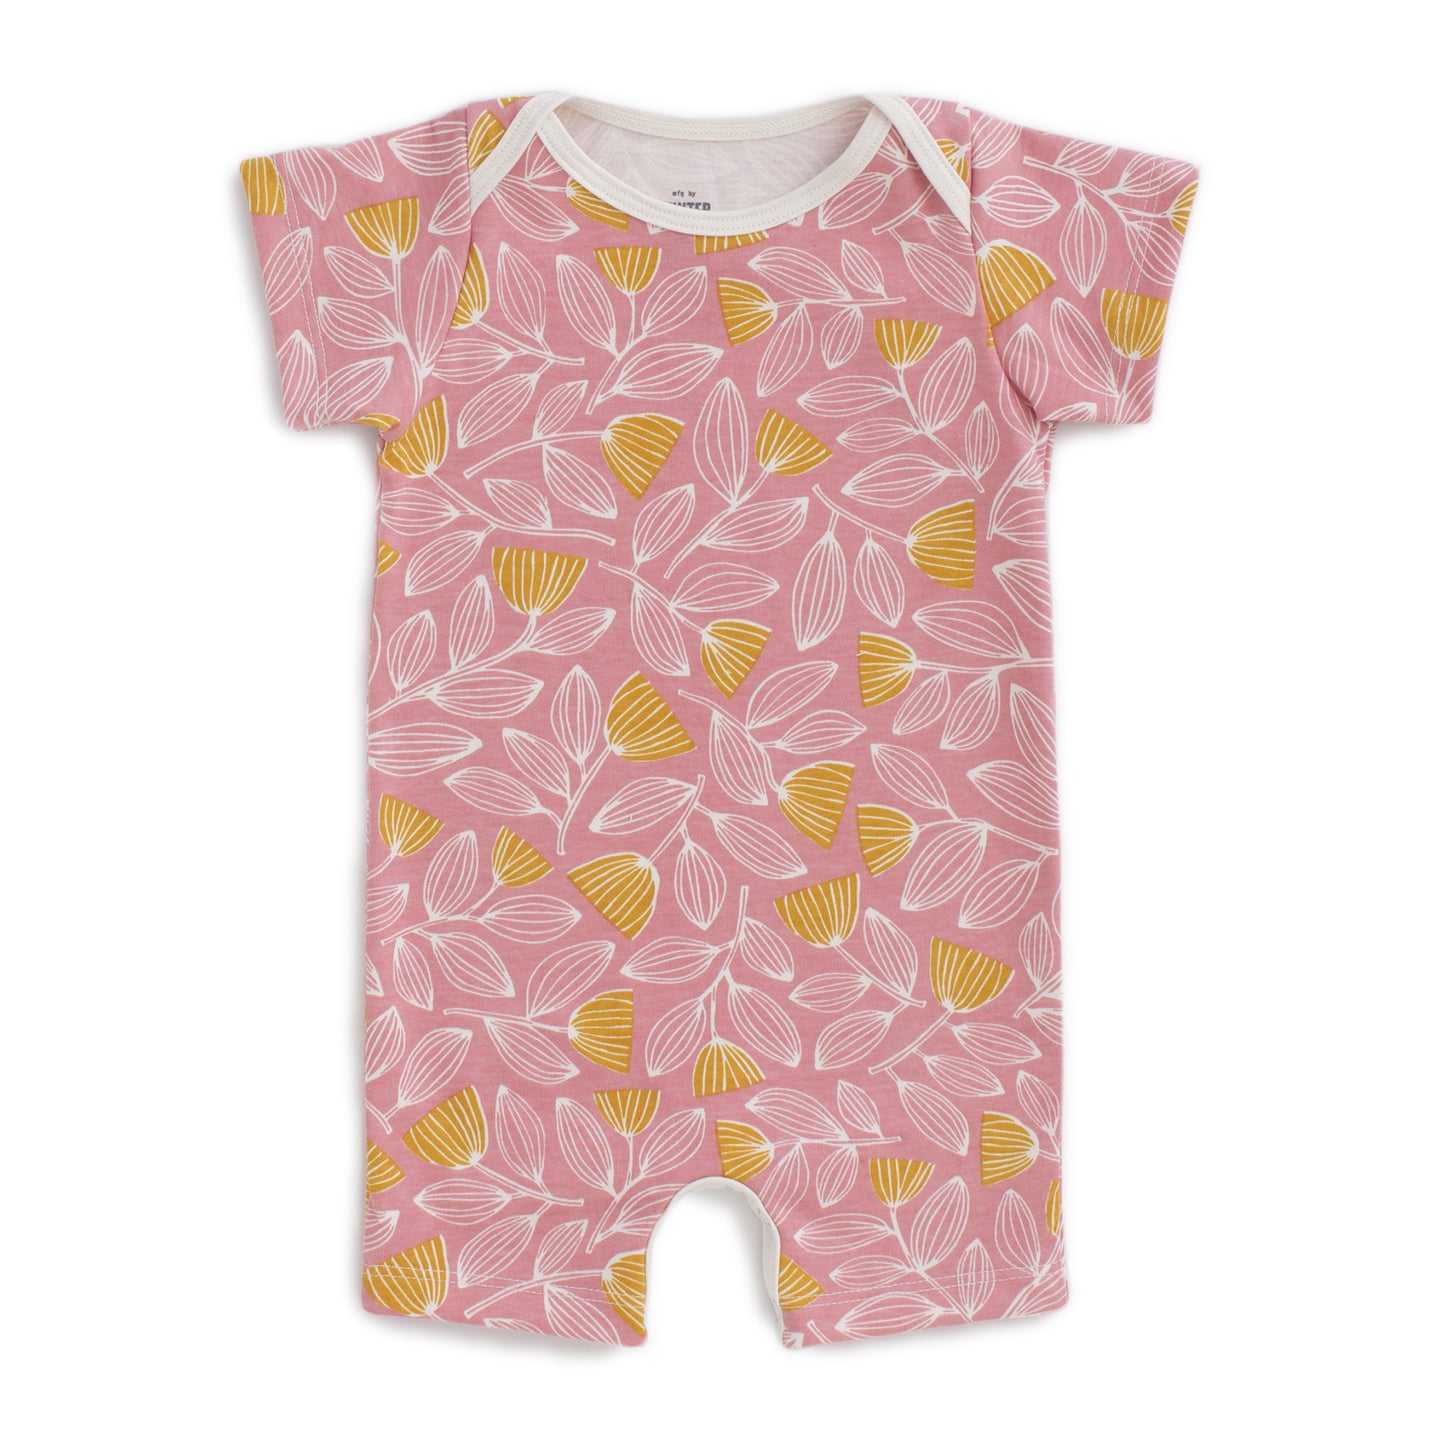 Summer Romper - Holland Floral Dusty Pink & Yellow